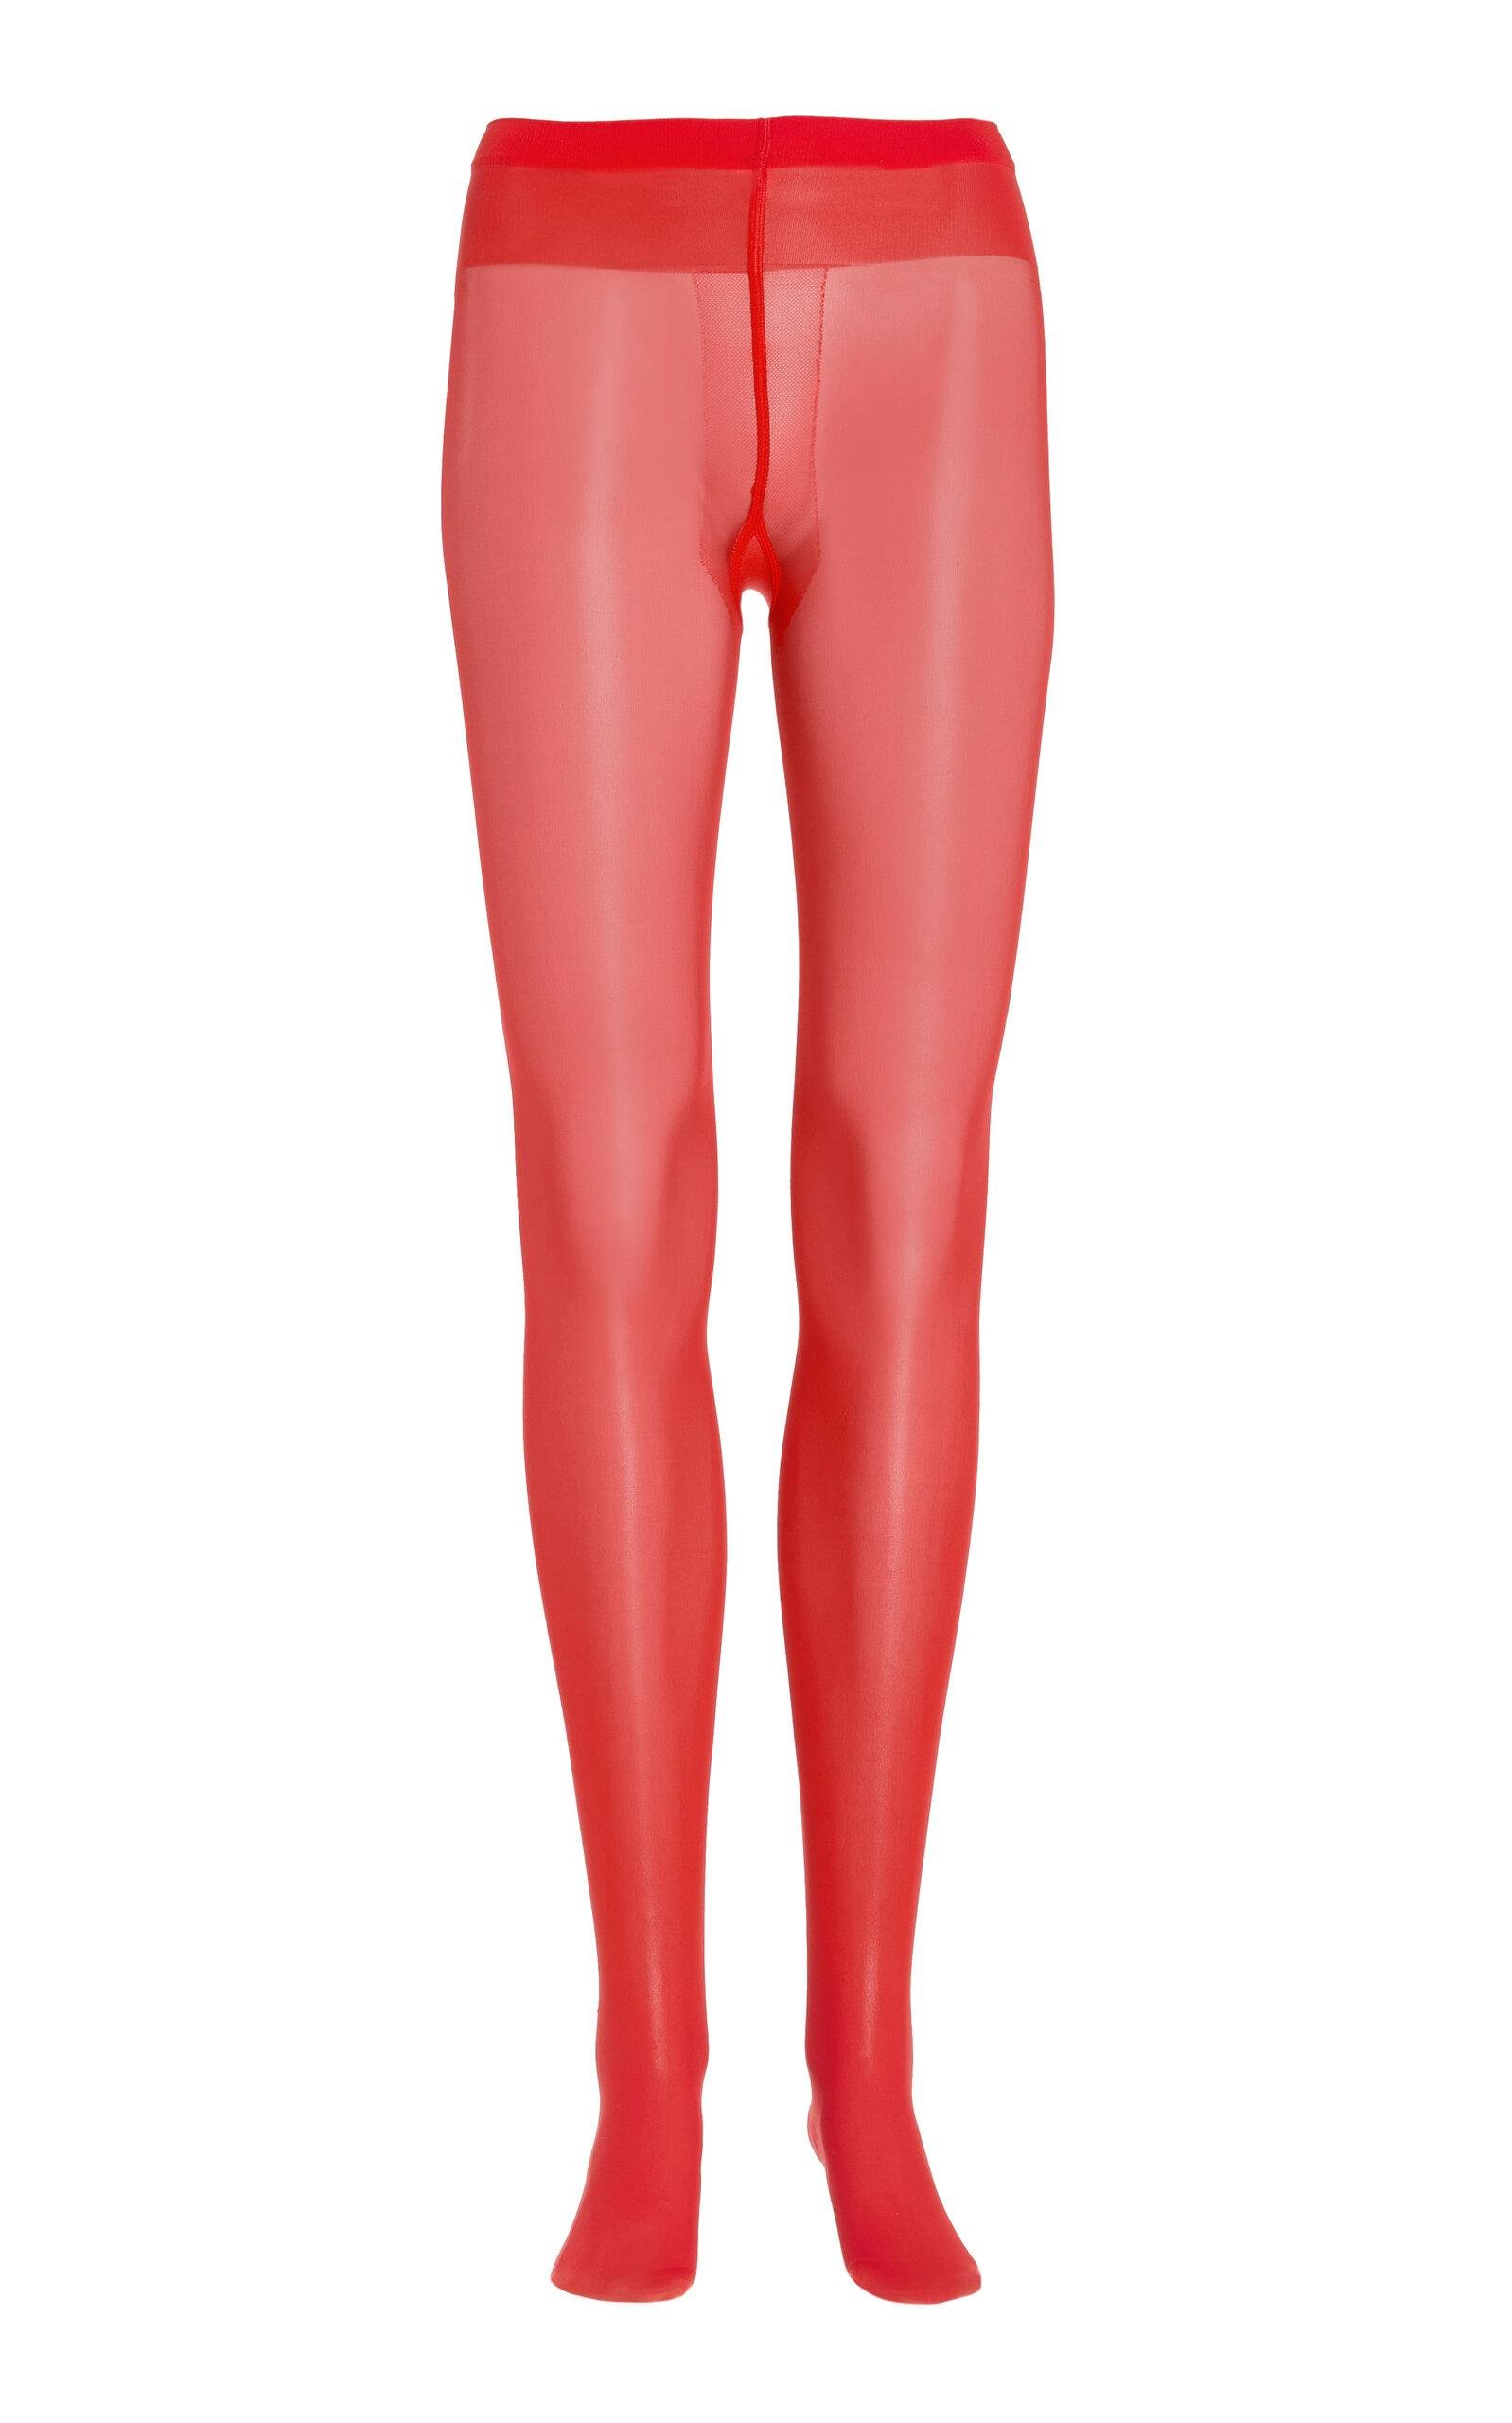 Wolford - Individual 20 Tights - Red - S - Moda Operandi by WOLFORD